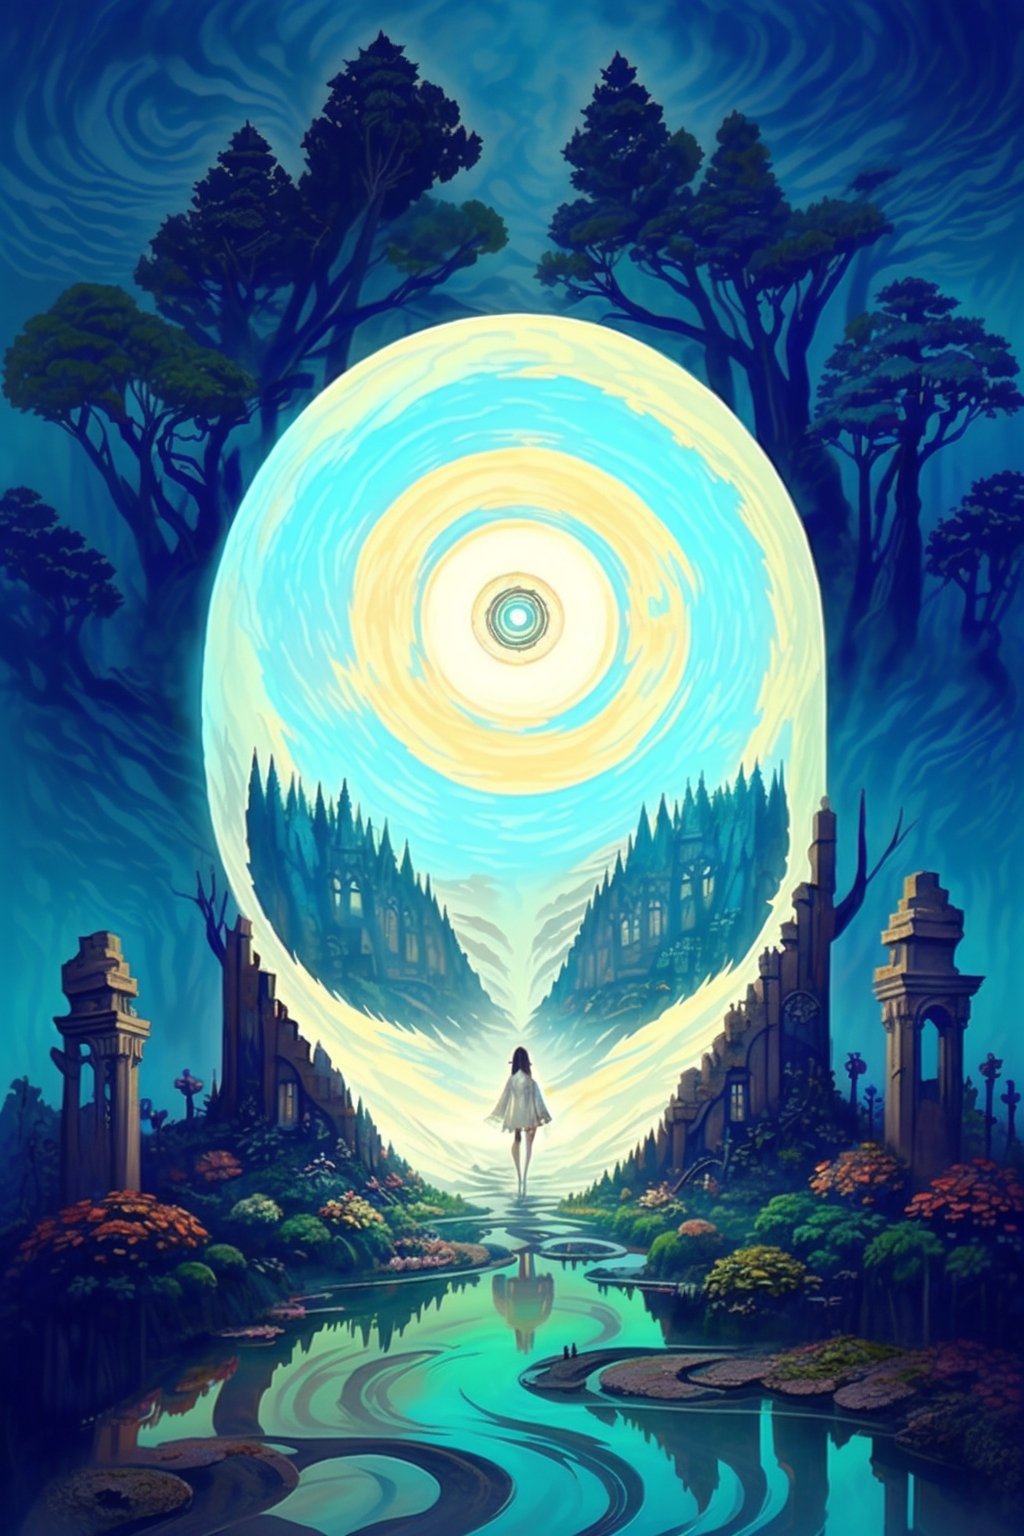 a bizarre dreamlike depiction of exploring the unknown, (1 white boy , 1 Japanese girl), dark hair, holding hands, looking at sky, exploring a dark magical fantasy forest with twisted ancient trees, ancient magical ruins, hidden creatures, walking on reflection, path toward eye in pyramid, dreamscape, bizarre hallucinations, dreampunk, ghosts in mist, incredible artwork, painting, best quality, beautiful, perfect detail, ornate, rule of thirds, creepy, strange creatures, Fae ,magic Circle, magic patterns,Leonardo Style,Movie Still,dfdd,lofi, illustration,vector art,EpicSky